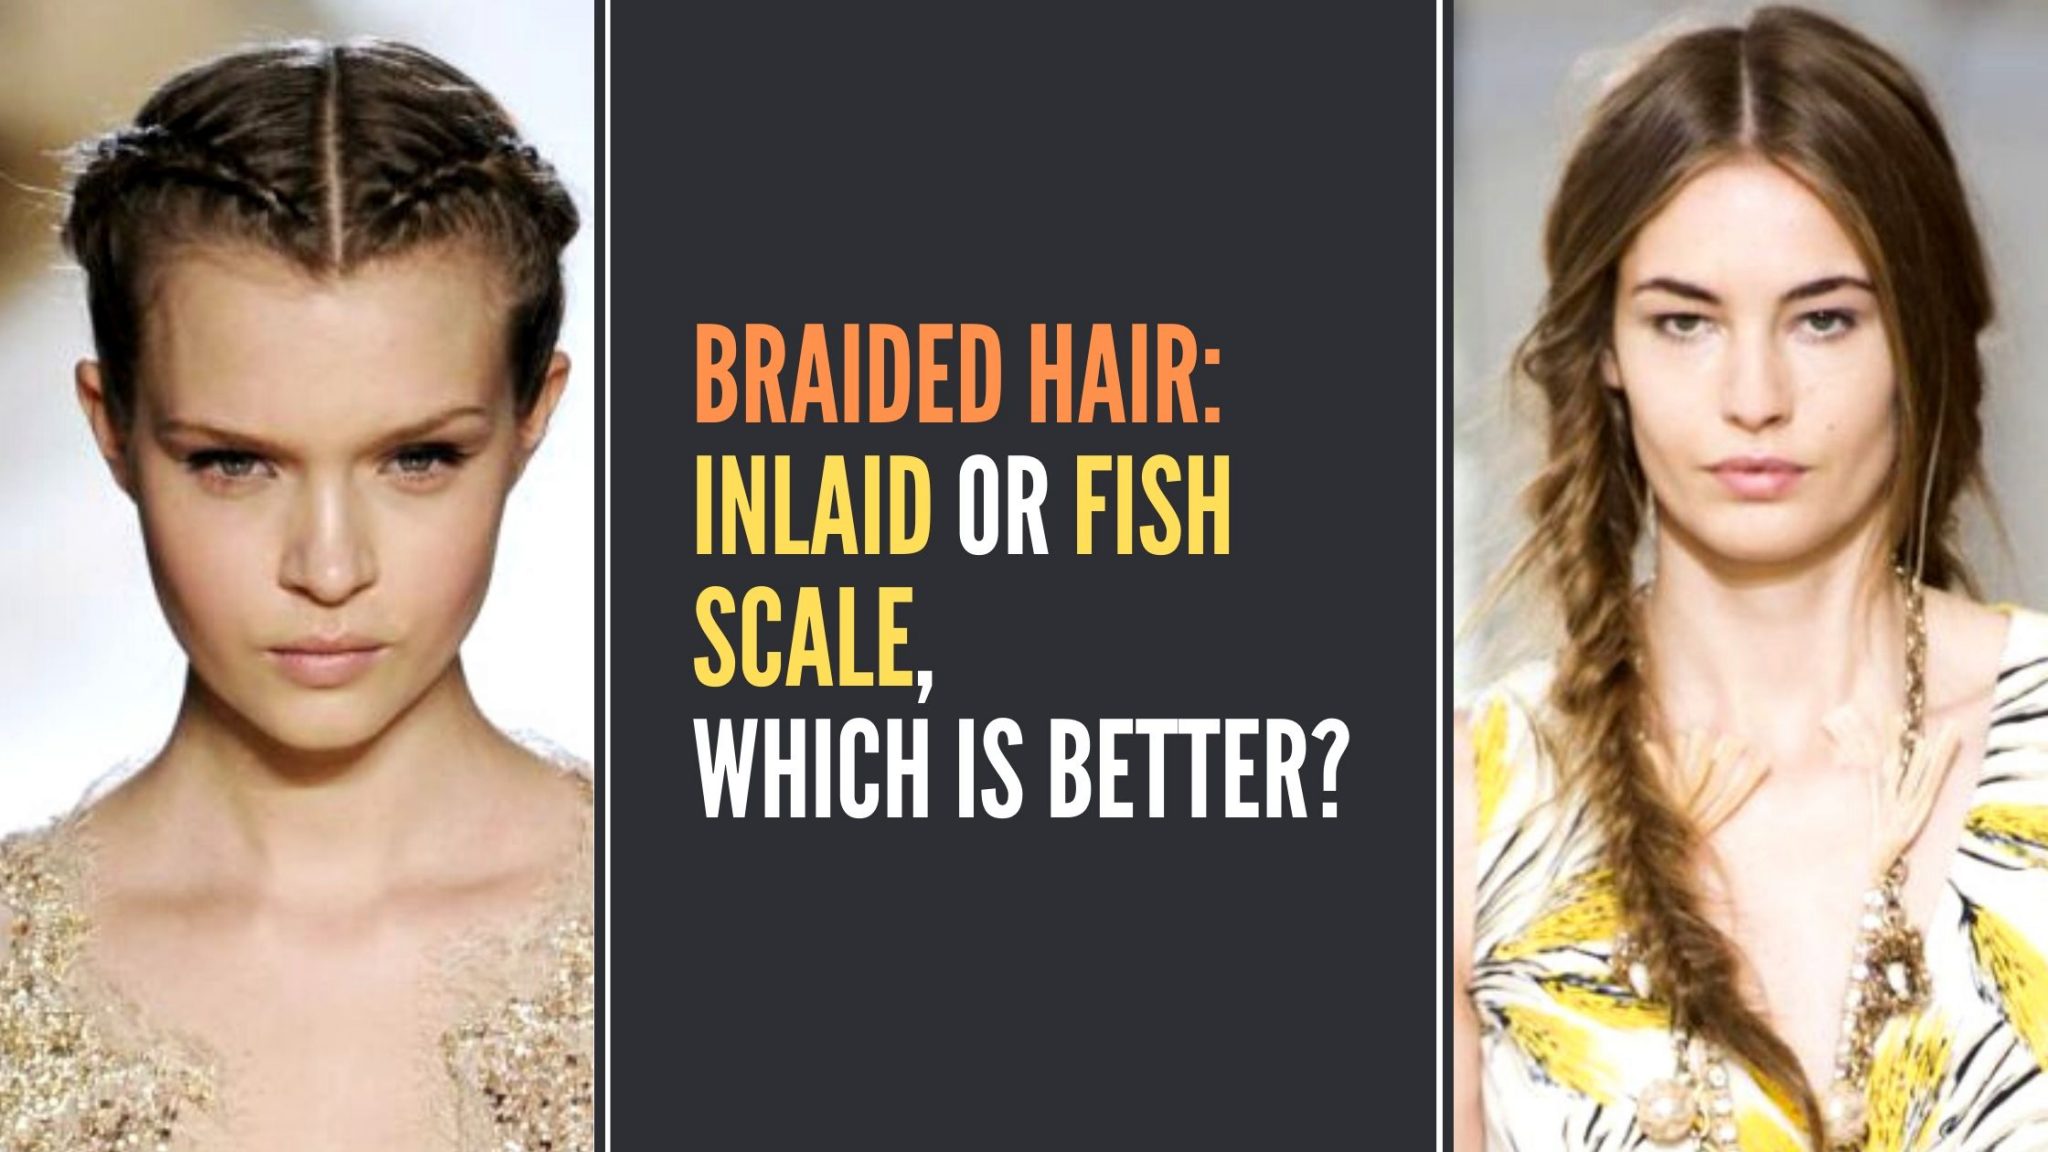 BRAIDED HAIR: INLAID OR FISH SCALE, WHICH IS BETTER?